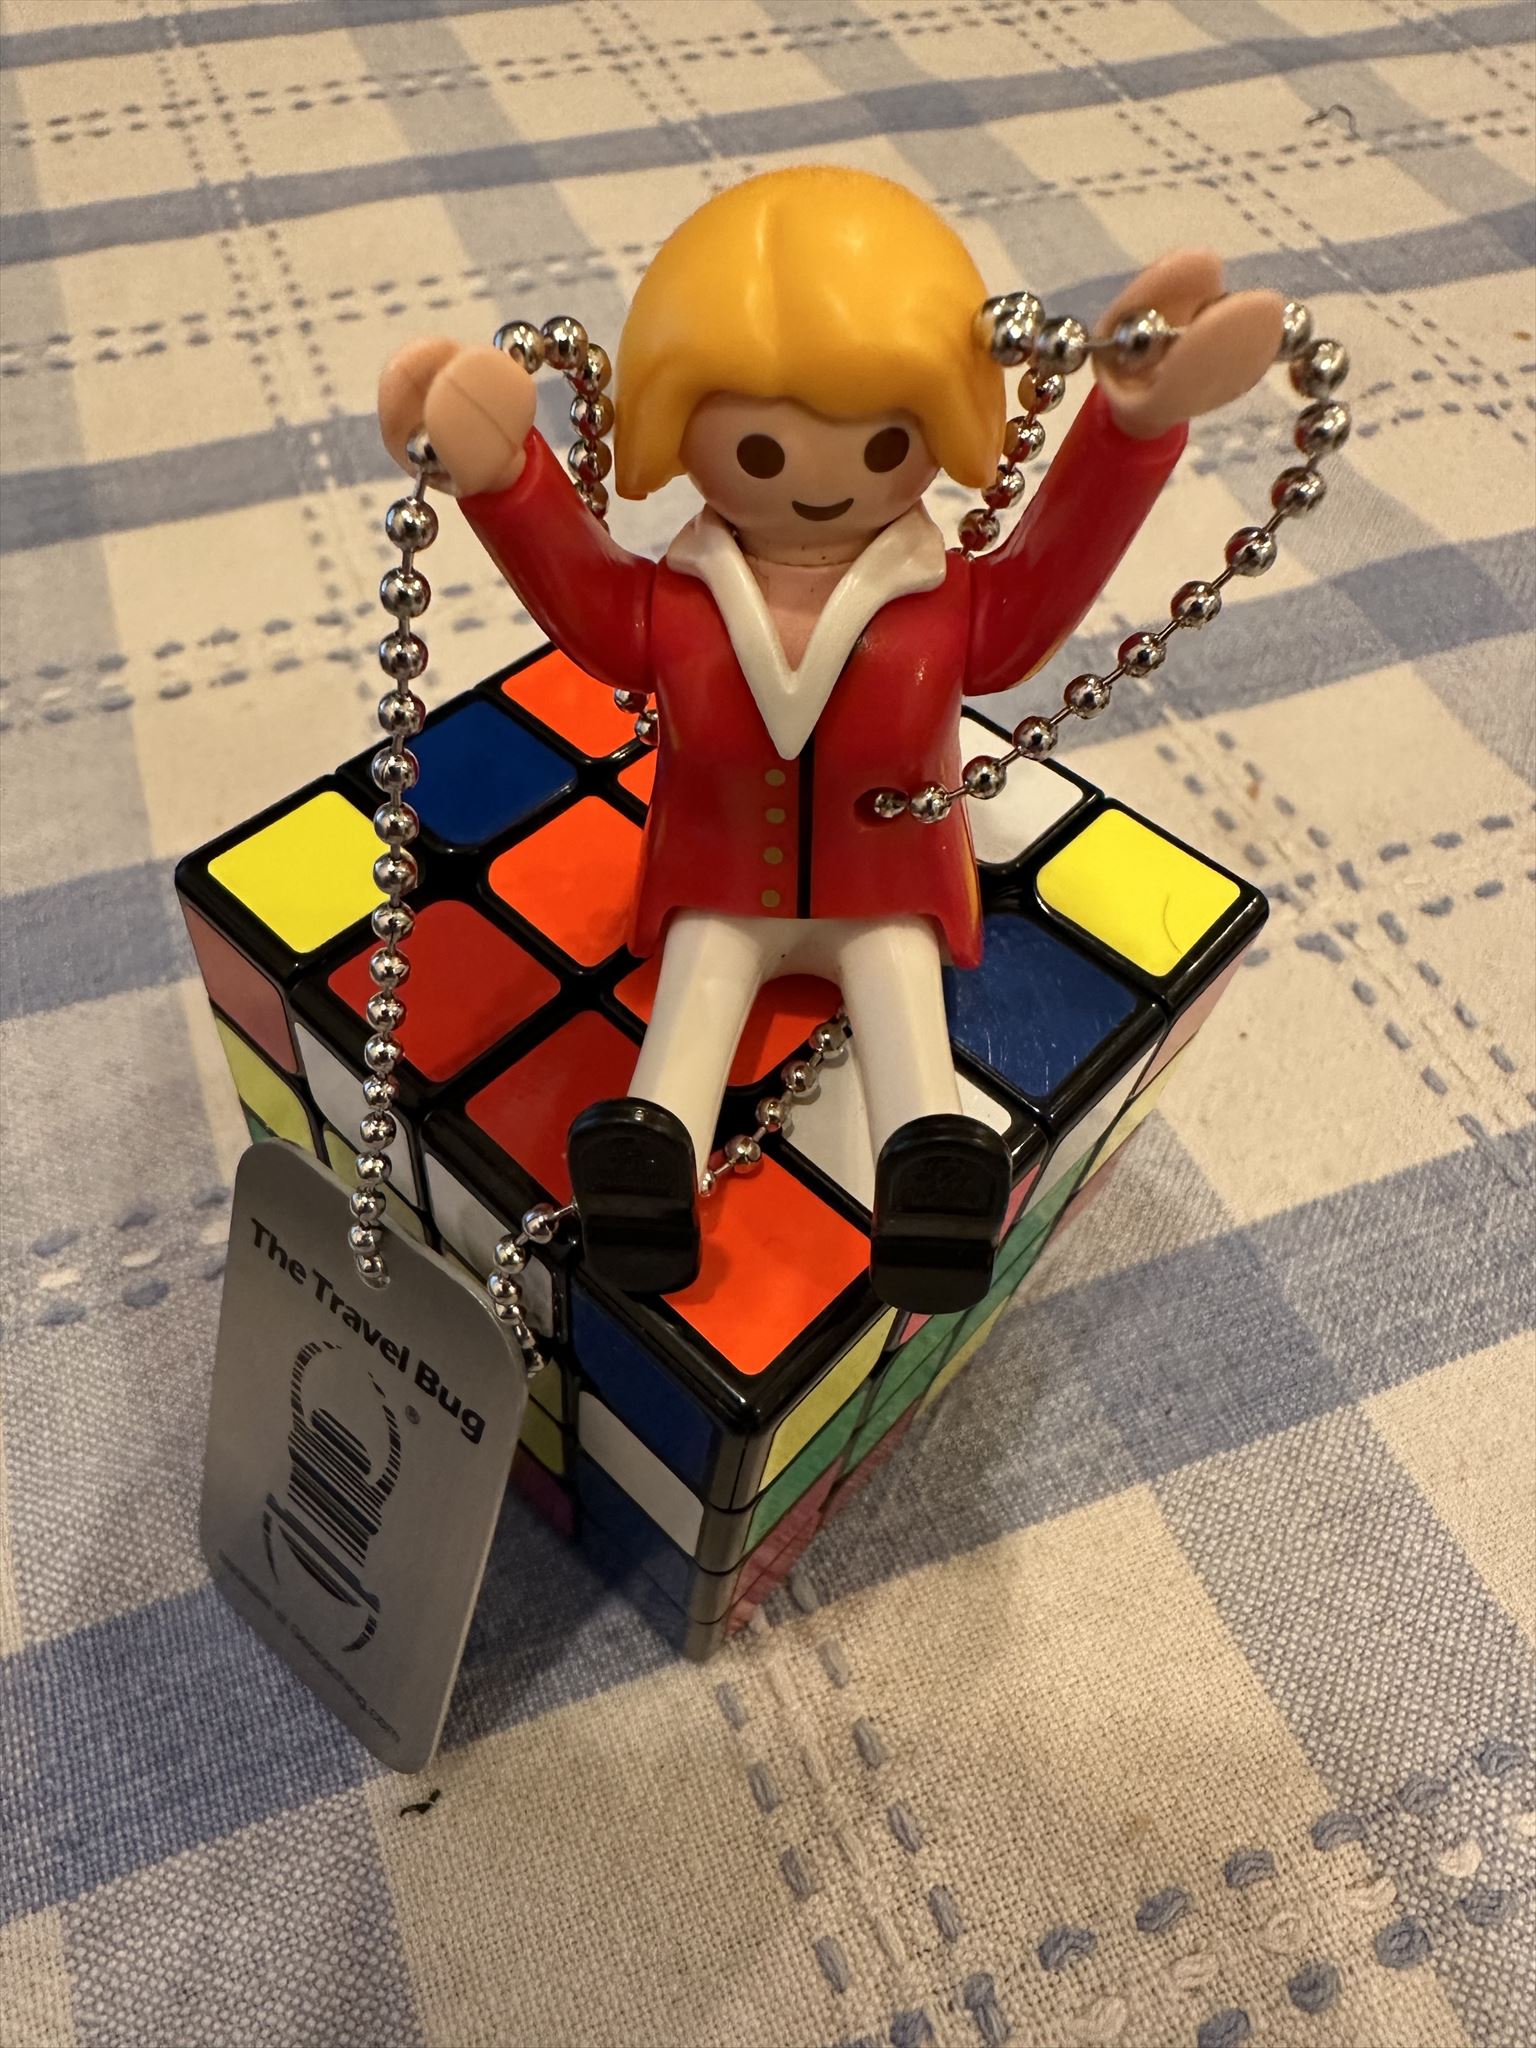 Female playmobil with blonde hair wearing a red jacket sittiing on a 4 by 4 rubiks cube